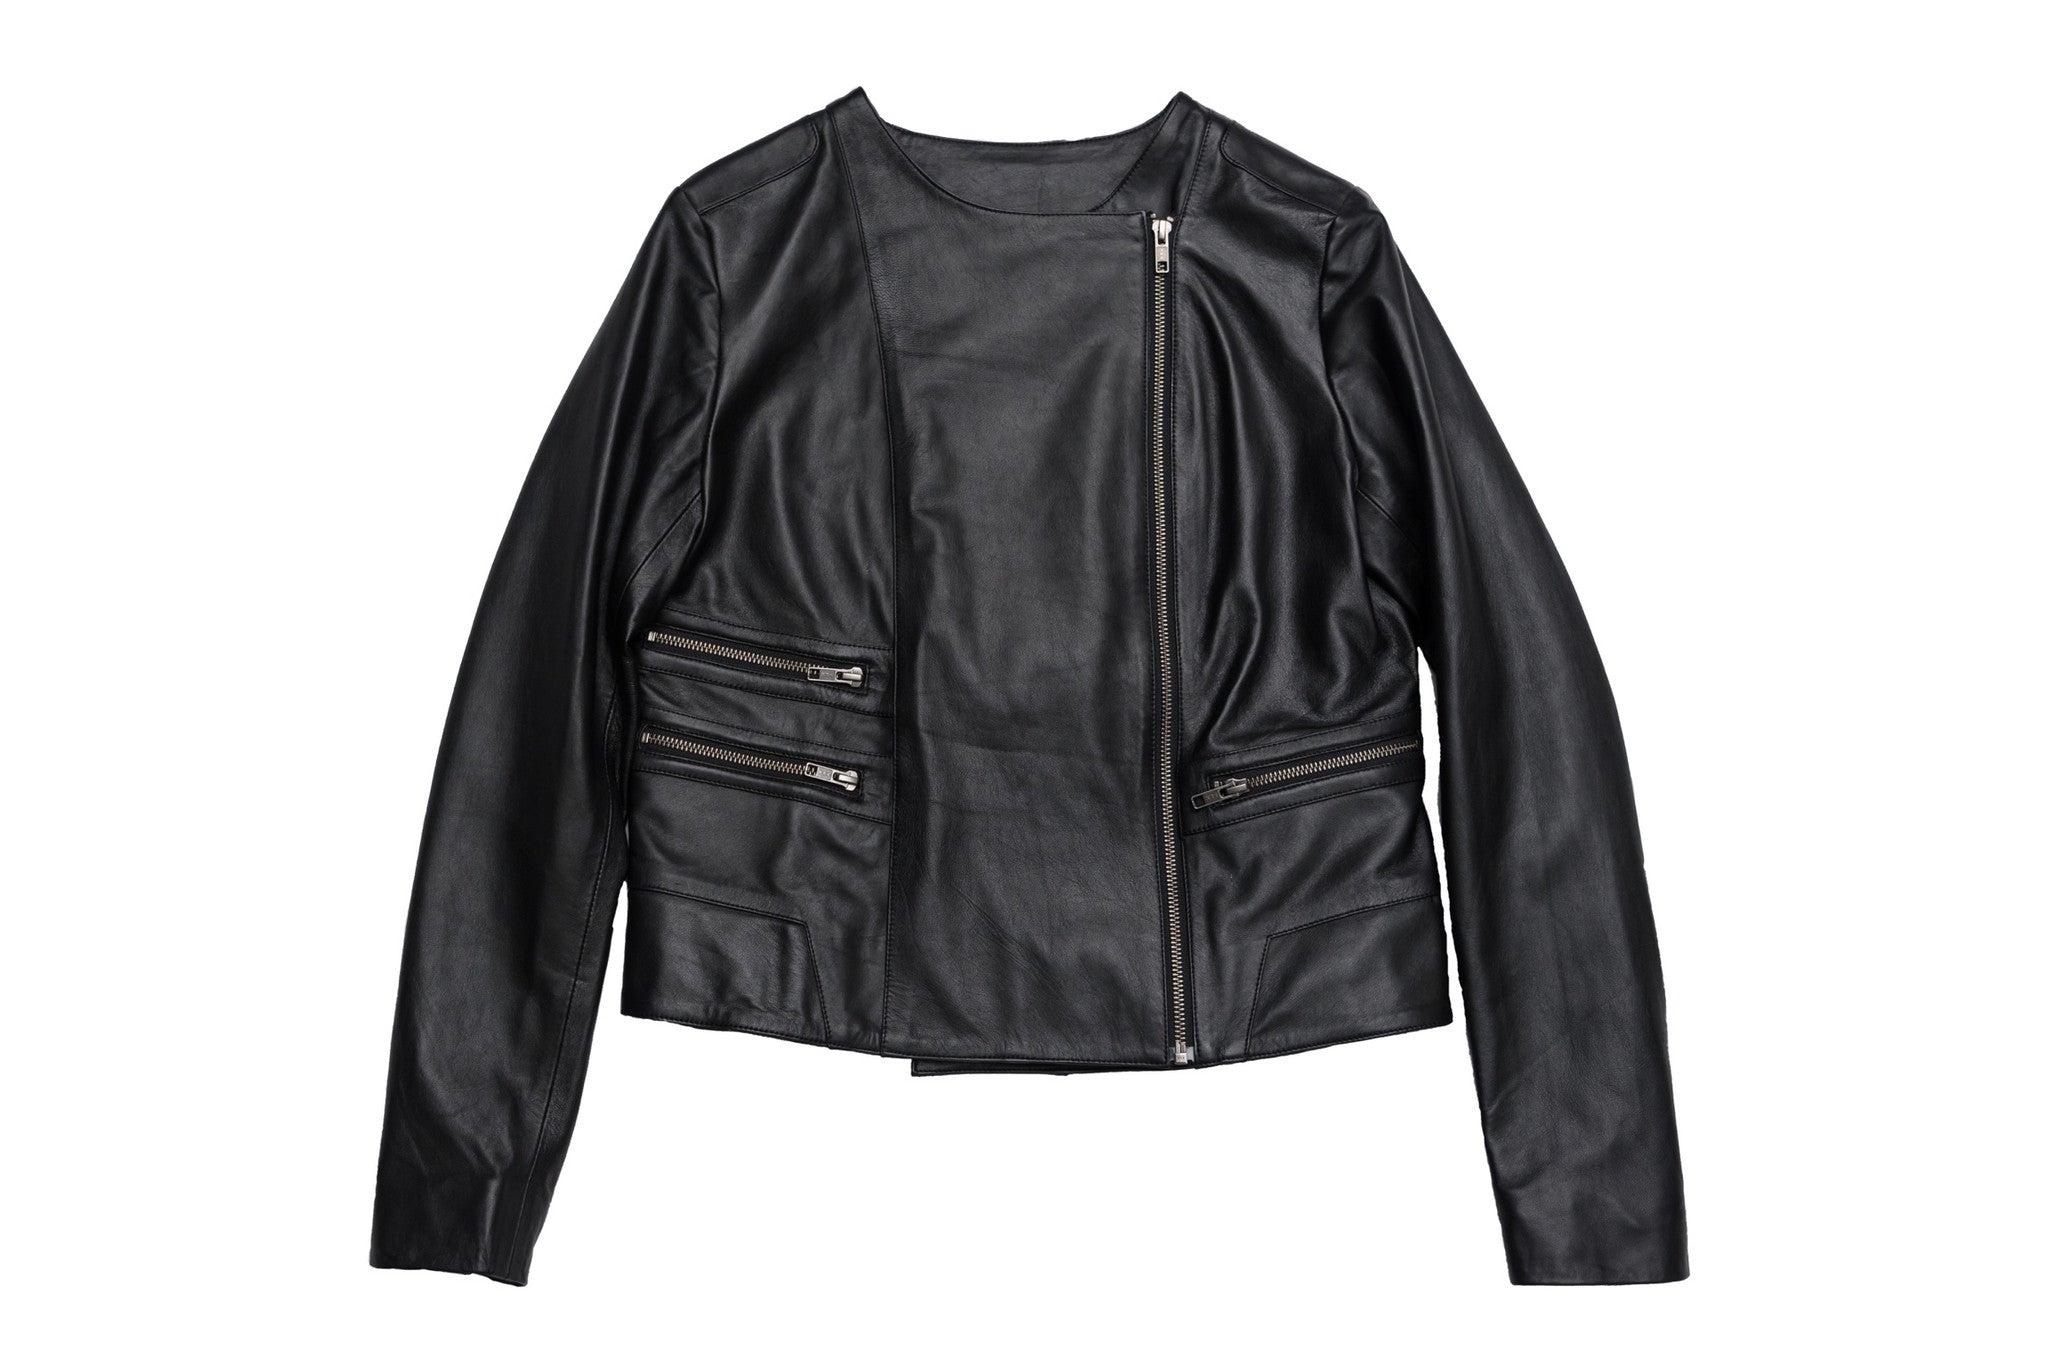 Leather biker jacket available in black or navy. Zip details. Made from 100% authentic leather